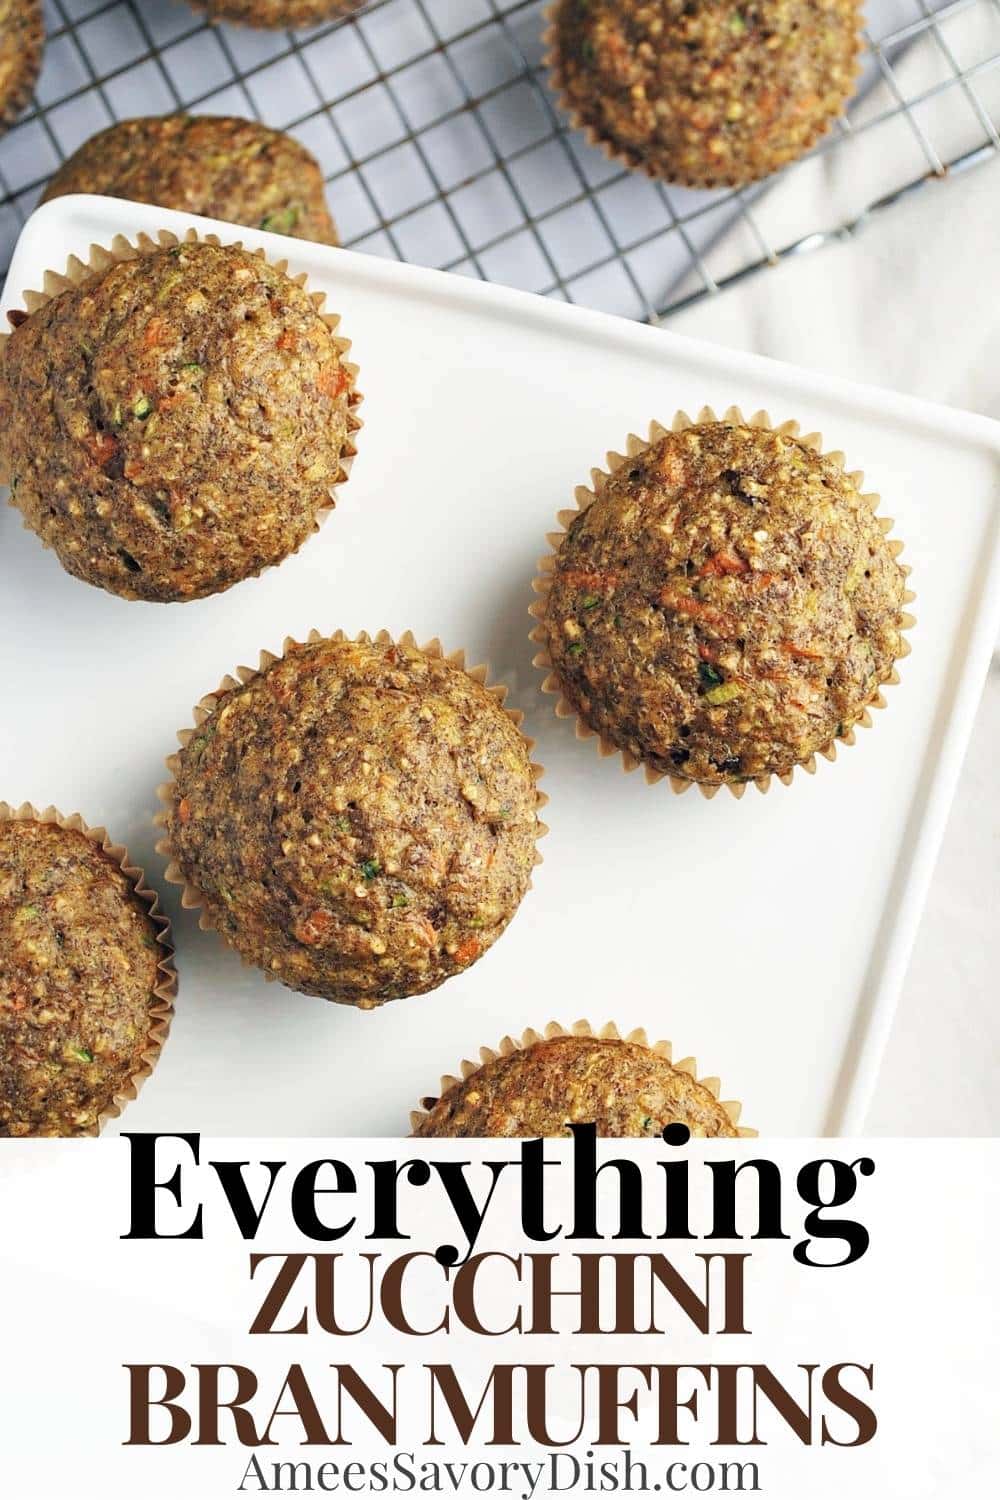 These zucchini bran muffins are made with shredded zucchini and carrots, unbleached flour, ground flaxseed, oat bran, raisins, and walnuts.  This healthier muffin recipe is simple and incredibly delicious!   via @Ameessavorydish